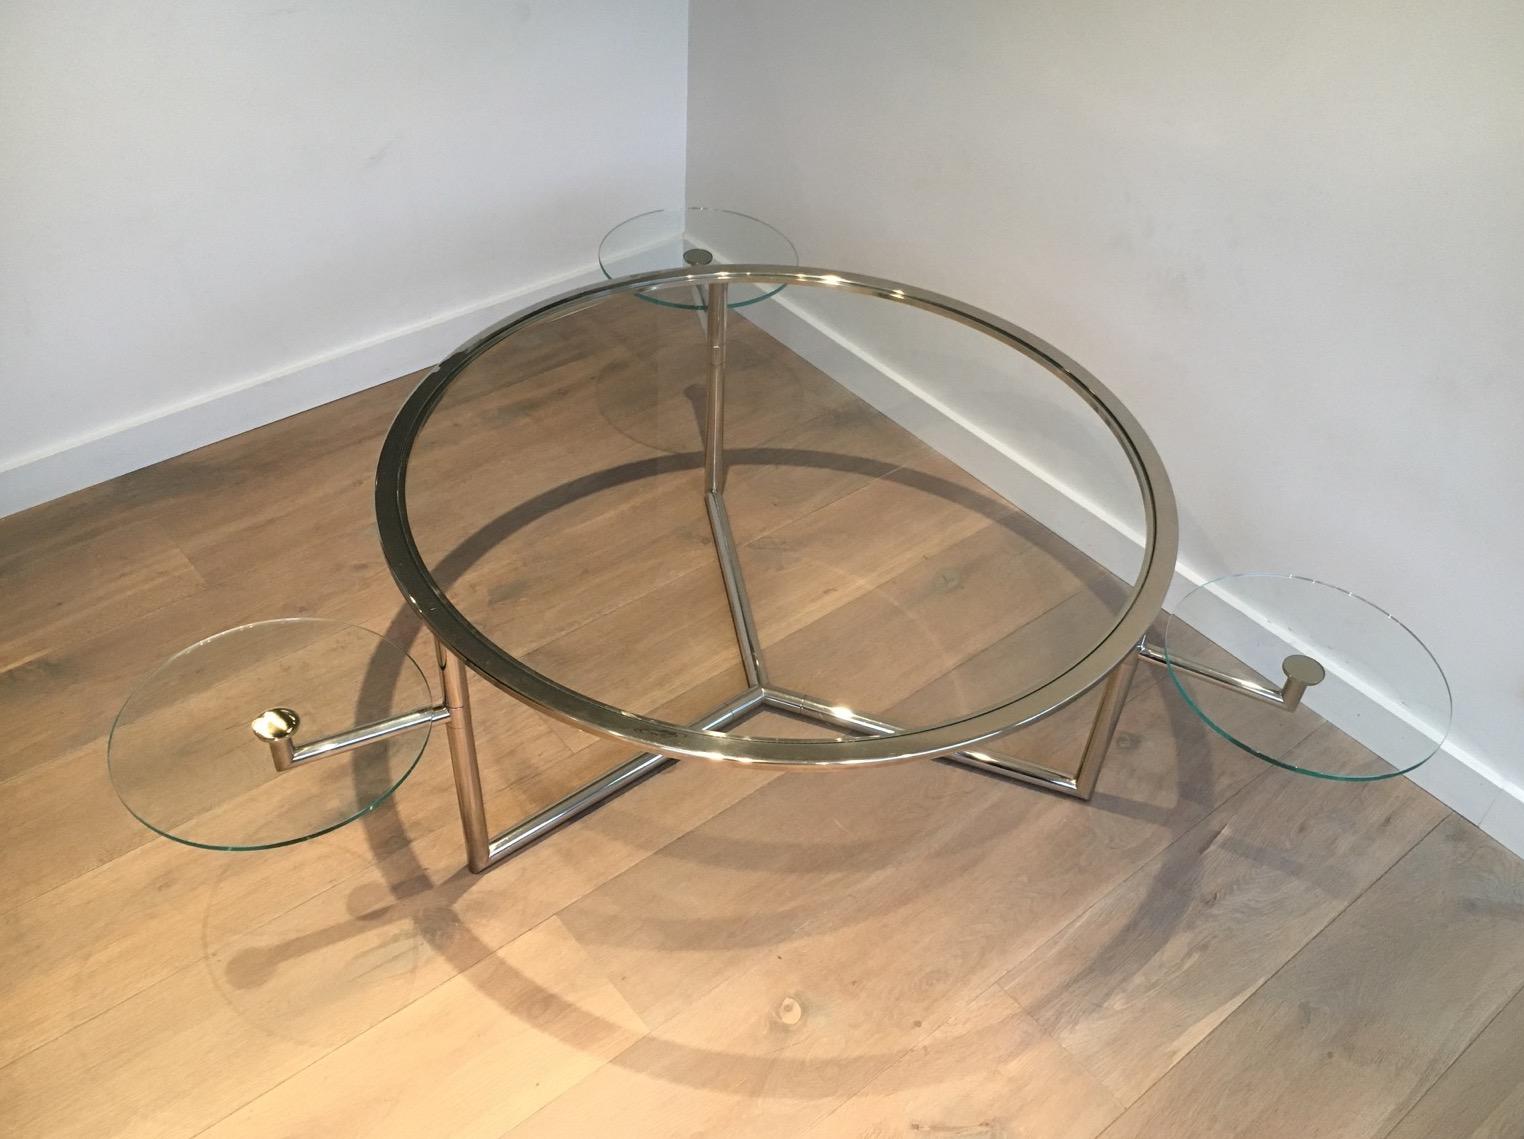 This beautiful and rare round coffee table is made of chrome with clear glass shelves. This is an interesting round model with 3 removable round glass shelves that can be adjusted to the use of the table. This is a French work, circa 1970.